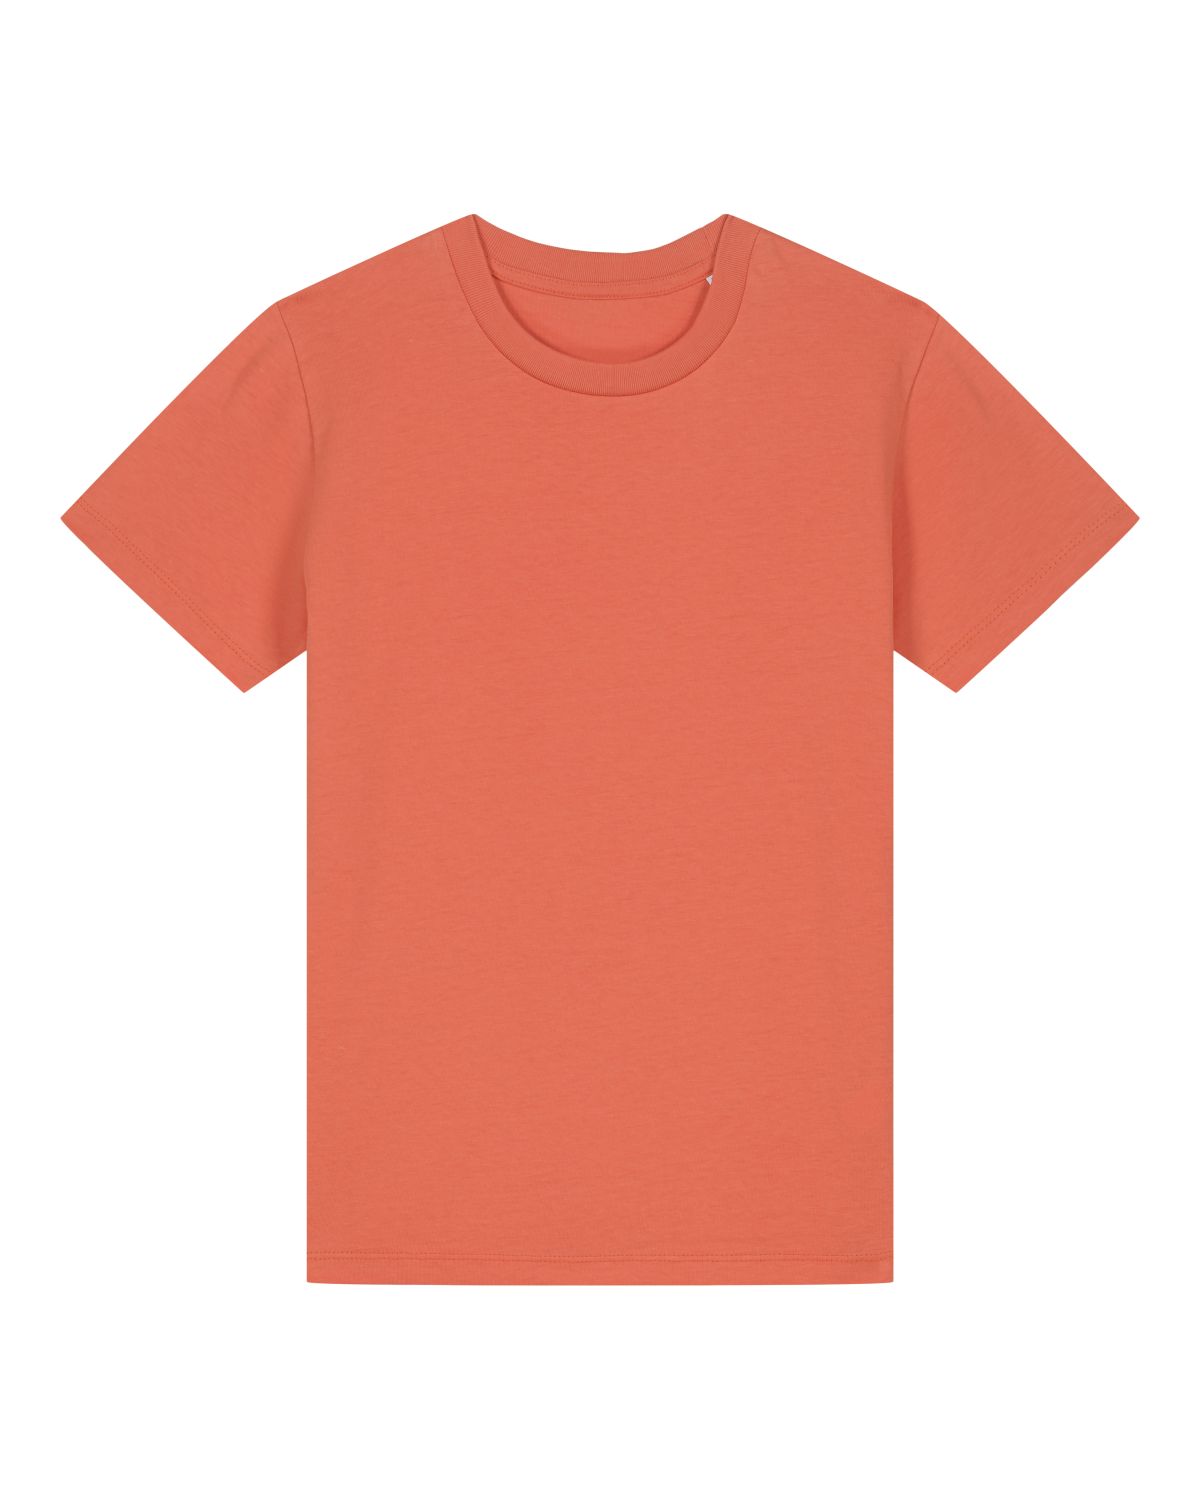 mecilla [**26184] THE ICONIC KIDS' T-Shirt